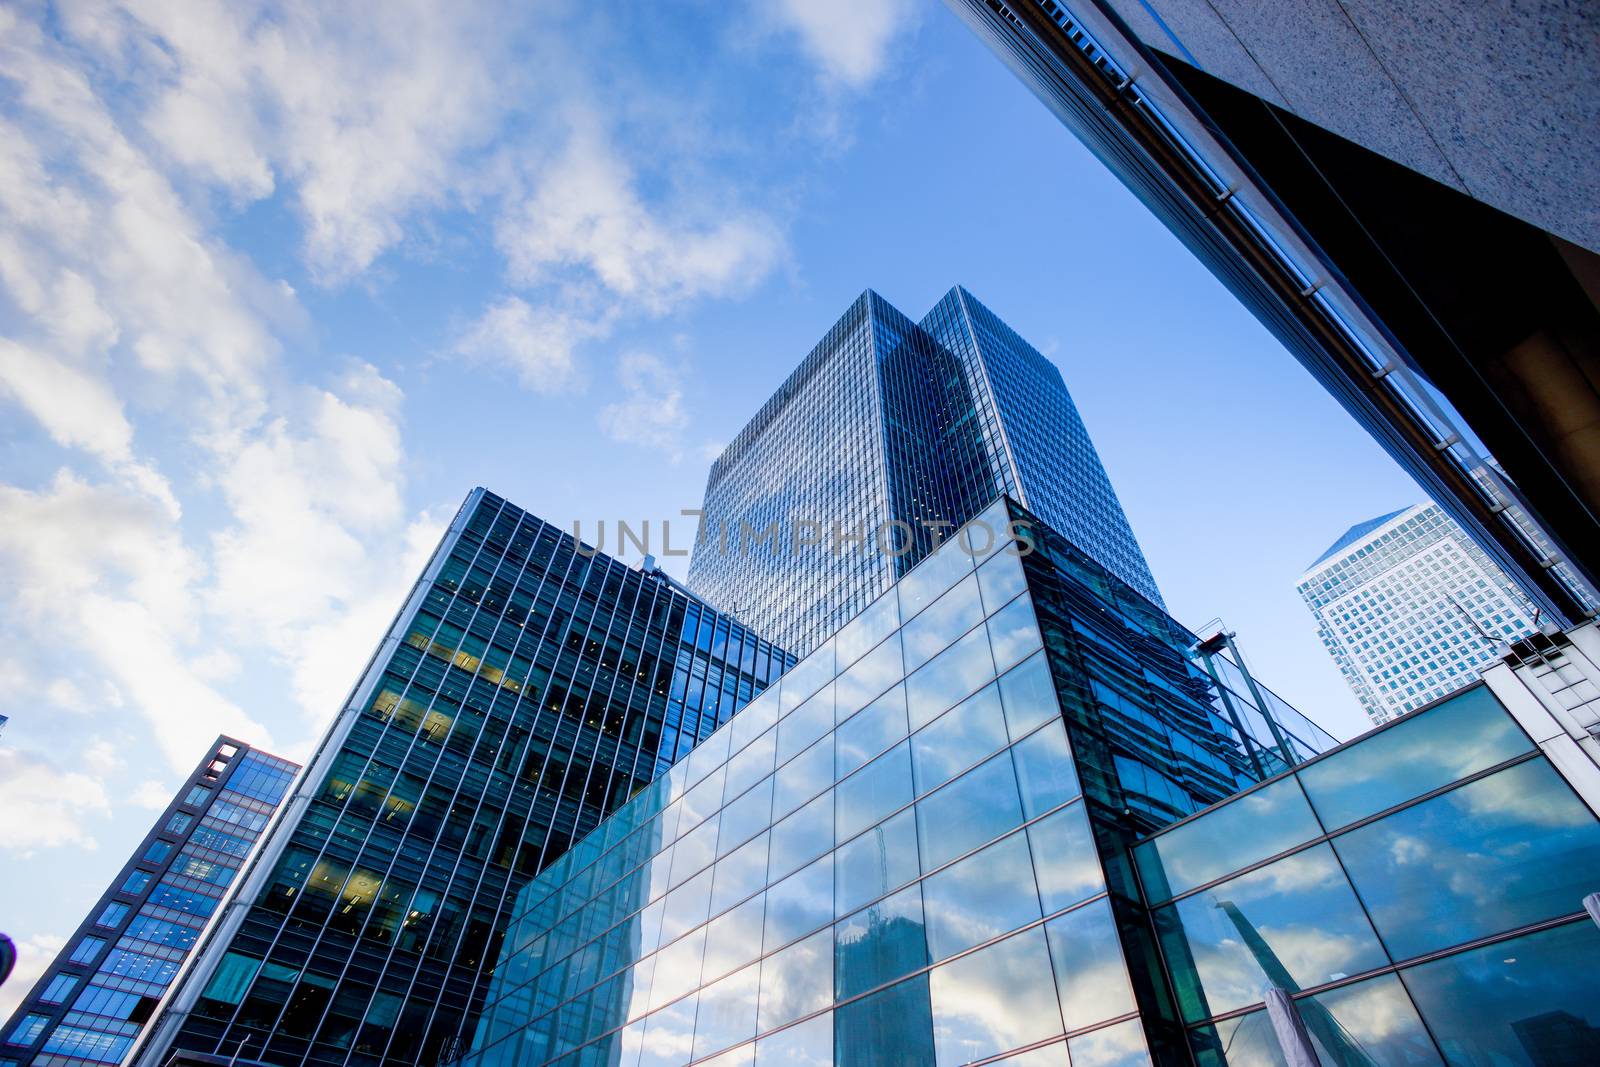 London office skyscrapper  building by Alicephoto